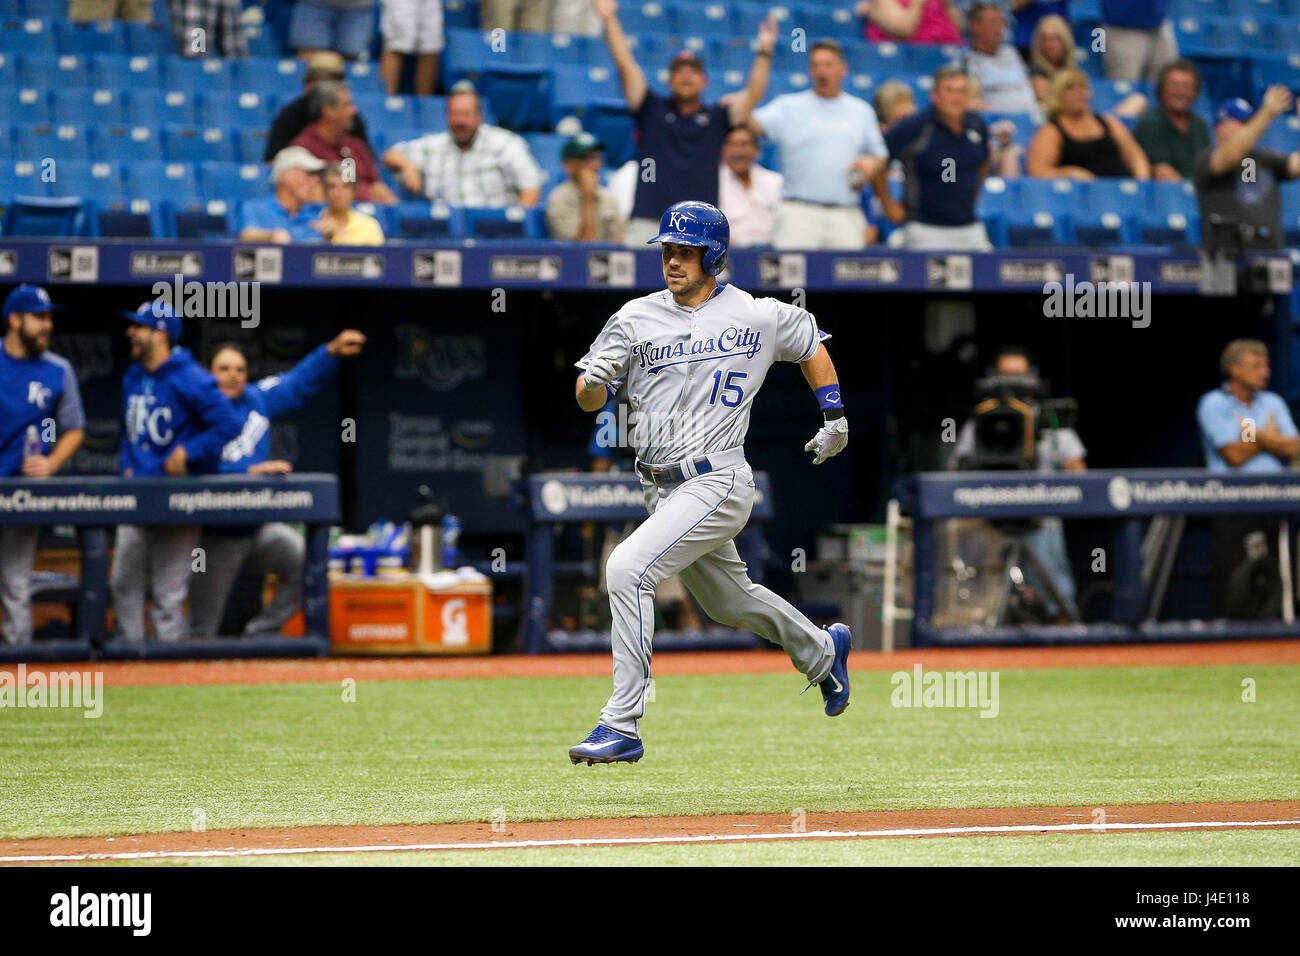 St. Petersburg, Florida, USA. 11th May, 2017. WILL VRAGOVIC | Times.Kansas City Royals second baseman Whit Merrifield (15) scores on the error by Tampa Bay Rays center fielder Kevin Kiermaier (39) on his single in the eighth inning of the game between the Tampa Bay Rays and the Kansas City Royals at Tropicana Field in St. Petersburg, Fla. on Thursday, May 11, 2017. The Kansas City Royals beat the Tampa Bay Rays 6-0. Credit: Will Vragovic/Tampa Bay Times/ZUMA Wire/Alamy Live News Stock Photo